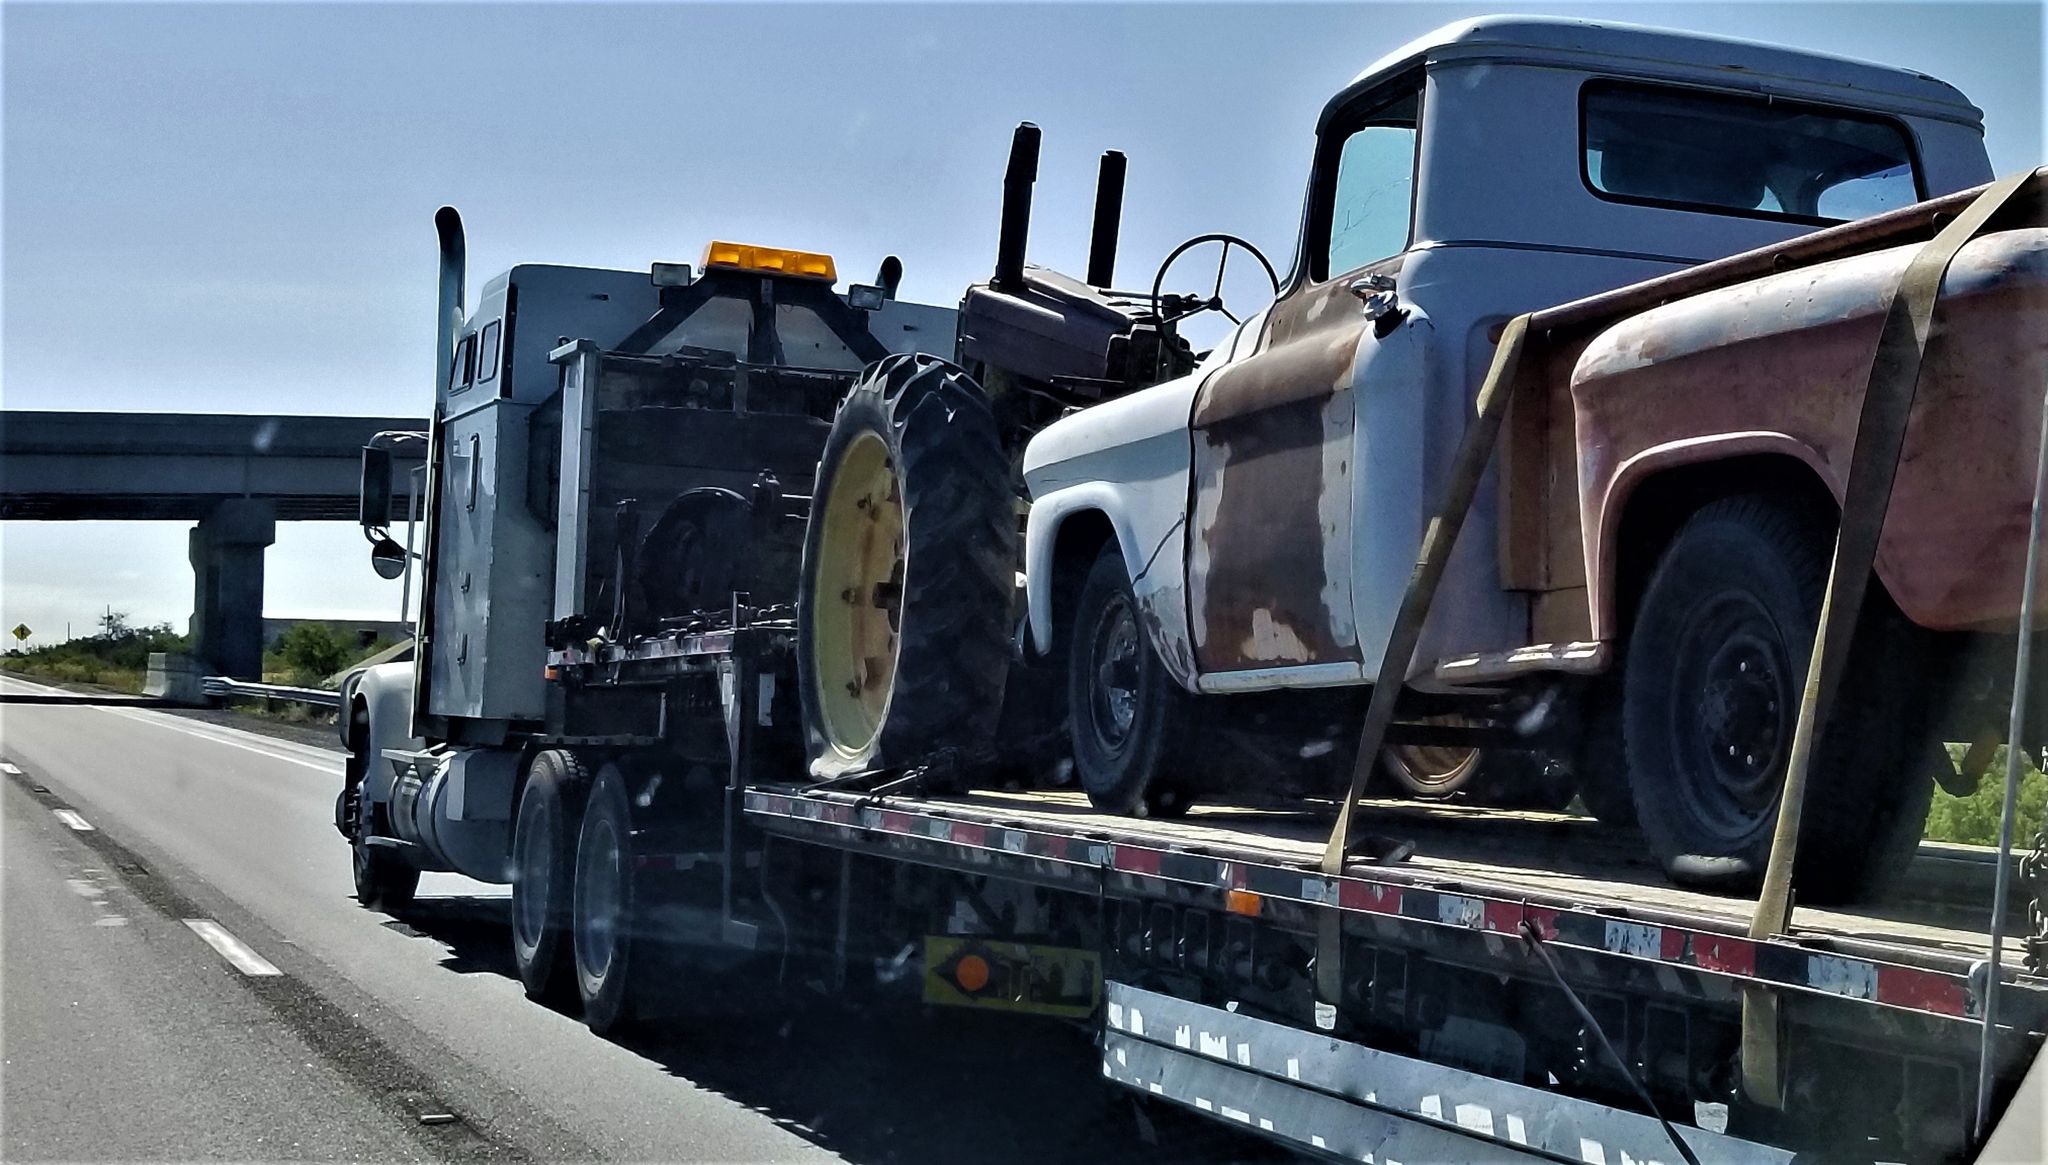 Old model truck and tractor on a flatbed truck being transported